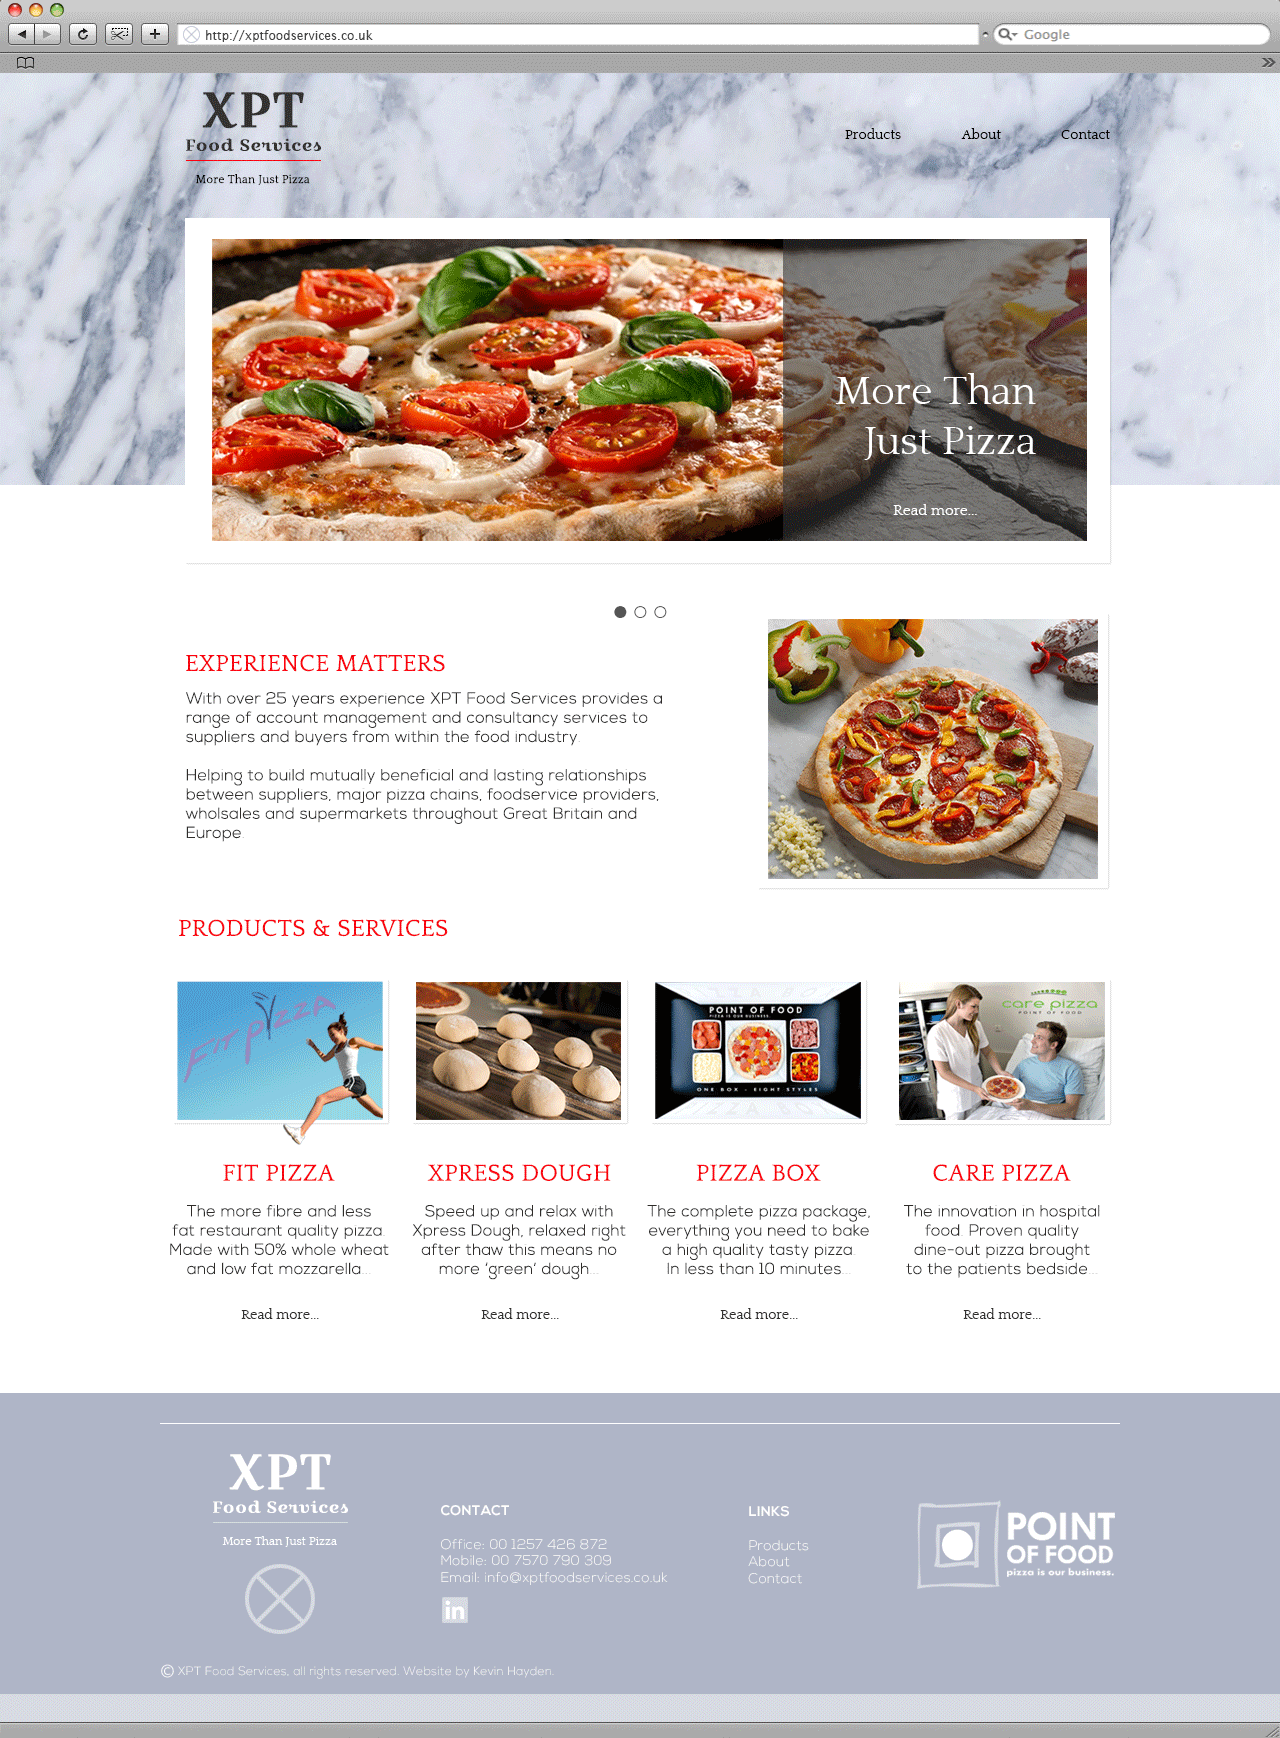 XPT website image.